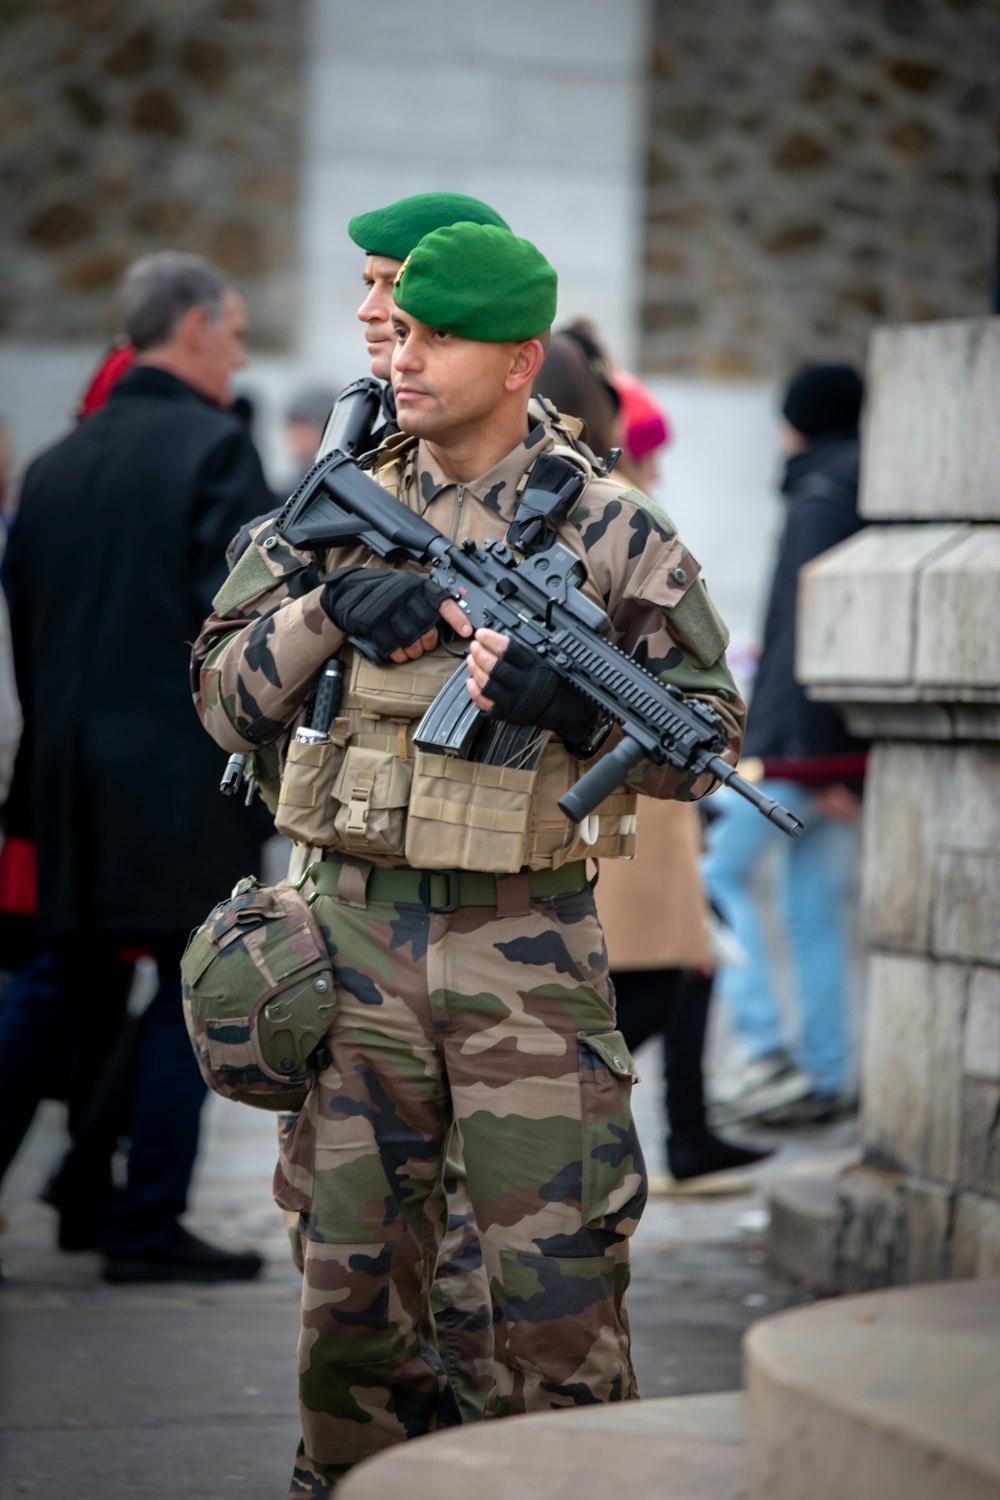 soldier with rifle stands guard in front of building